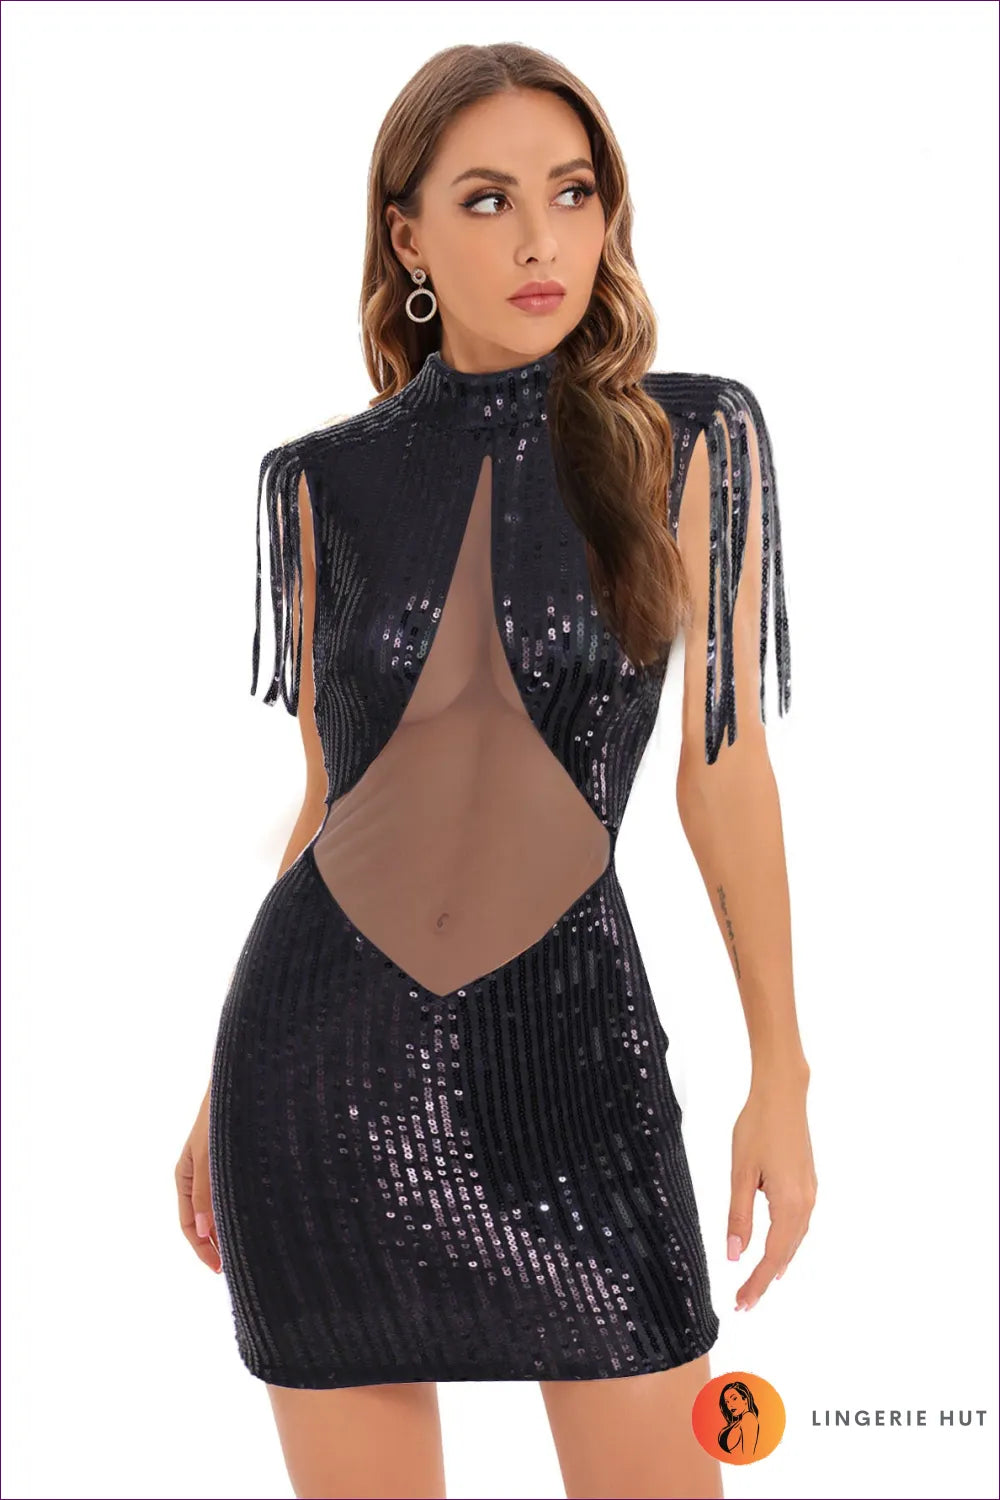 Turn Heads And Set The Night On Fire With This Show-stopping Glam Sequin Bodycon Dress. Embrace Your Allure At